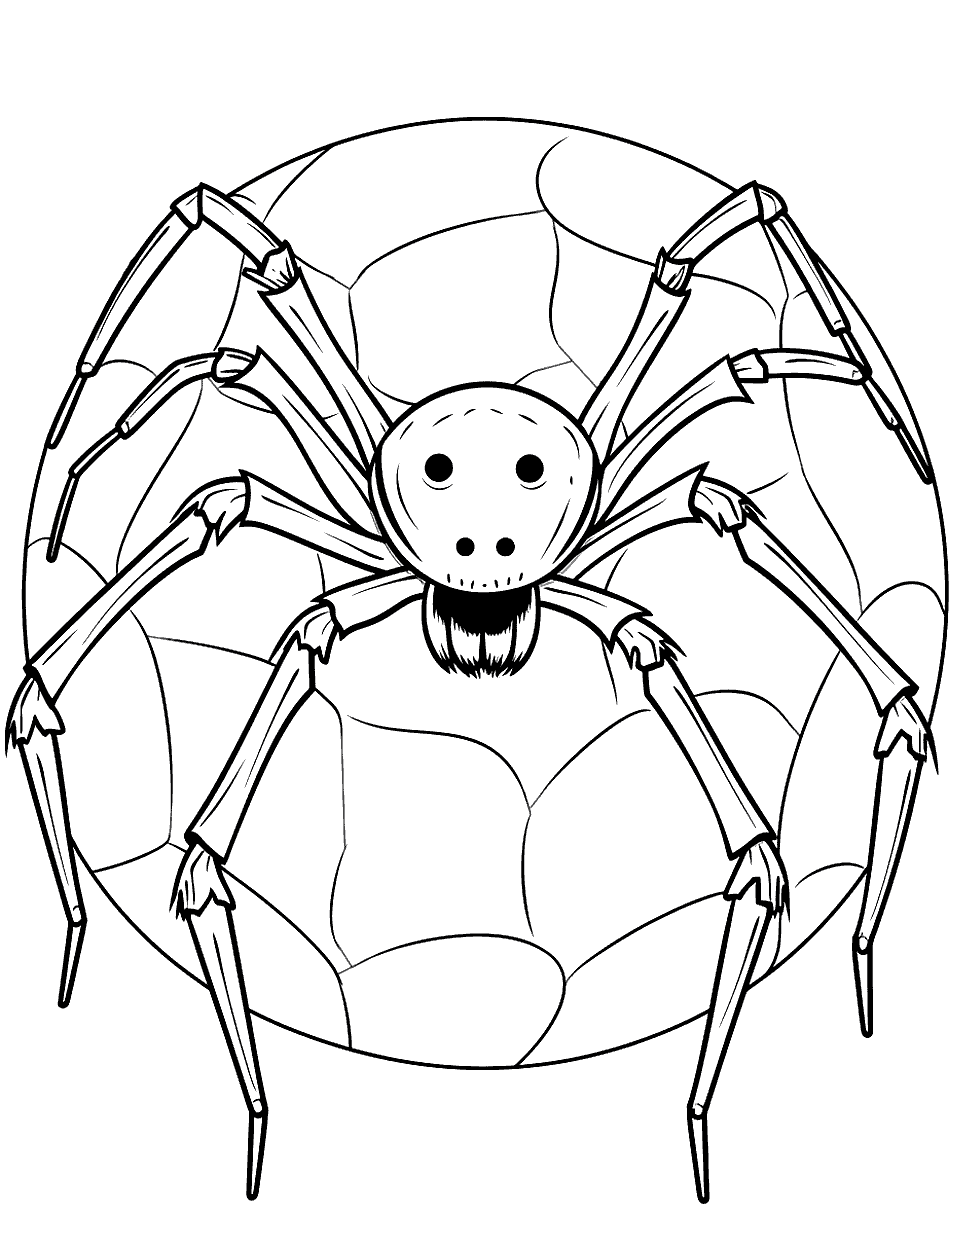 Spider on a Soccer Ball Coloring Page - A sporty spider sitting on top of a soccer ball.